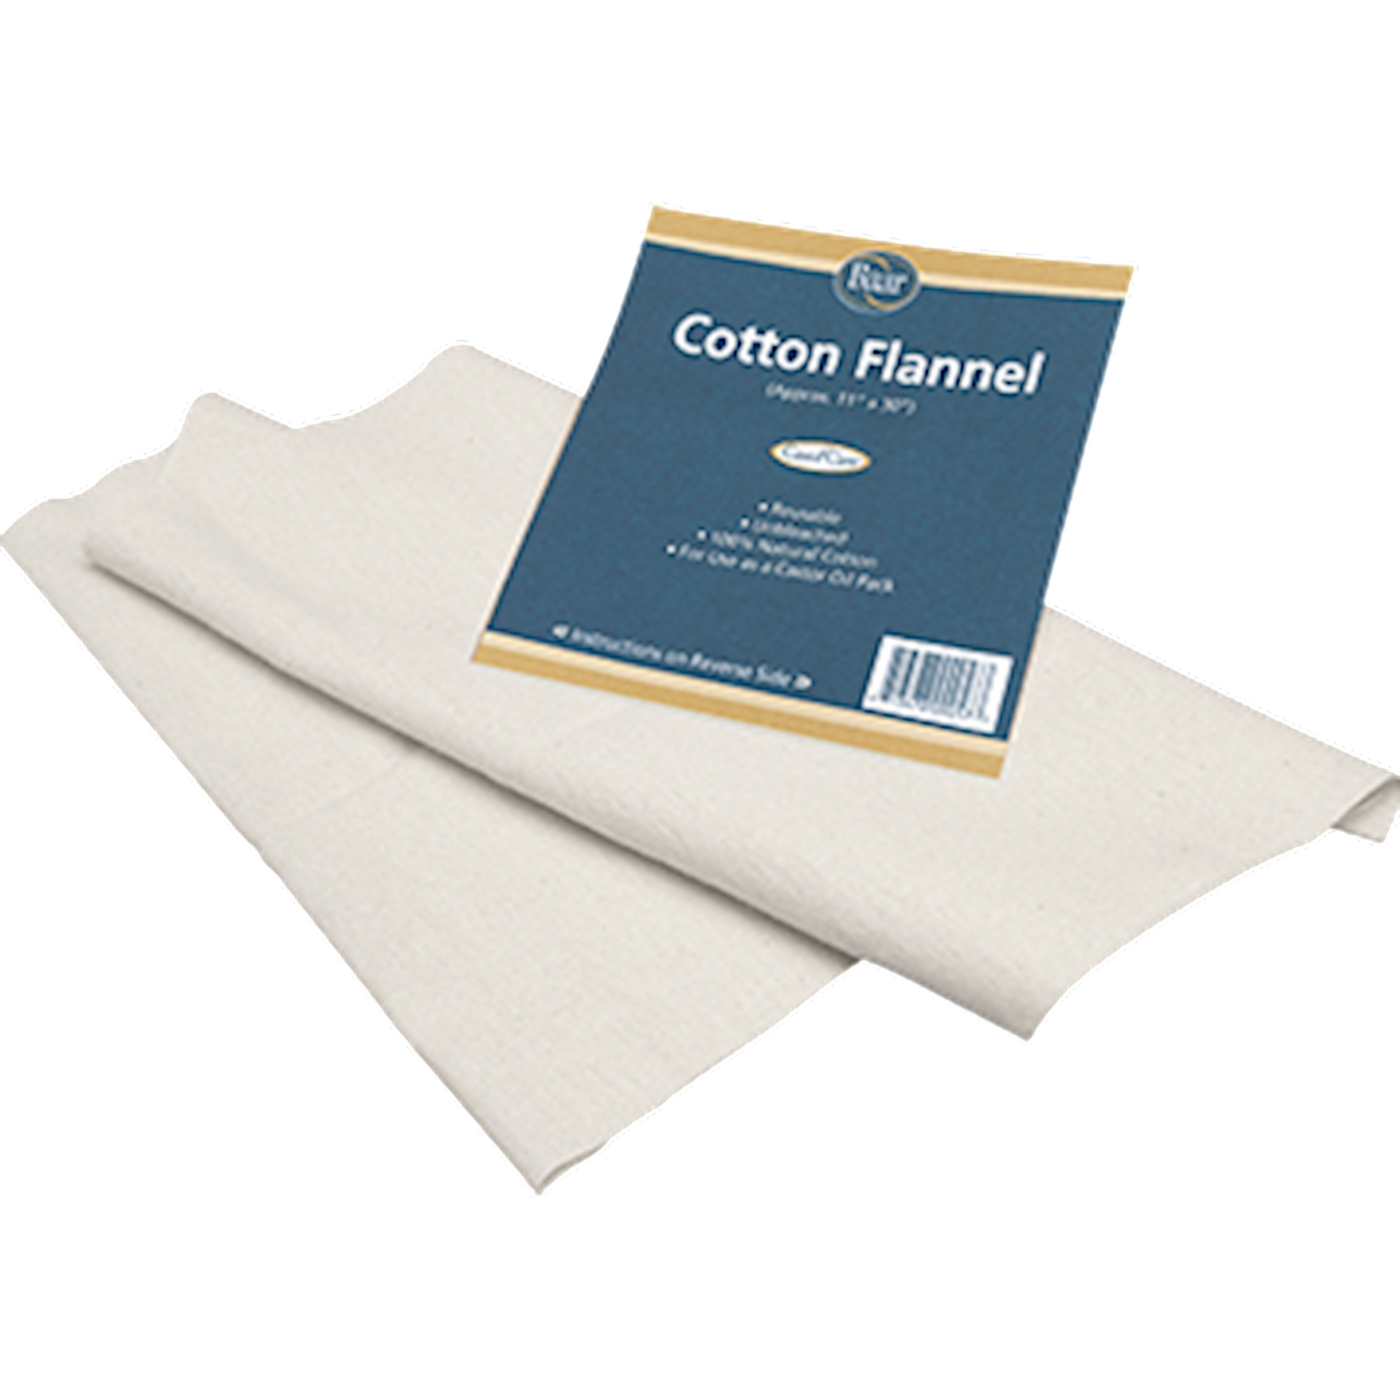 Cotton Flannel for Castor Oil 1 pack Curated Wellness